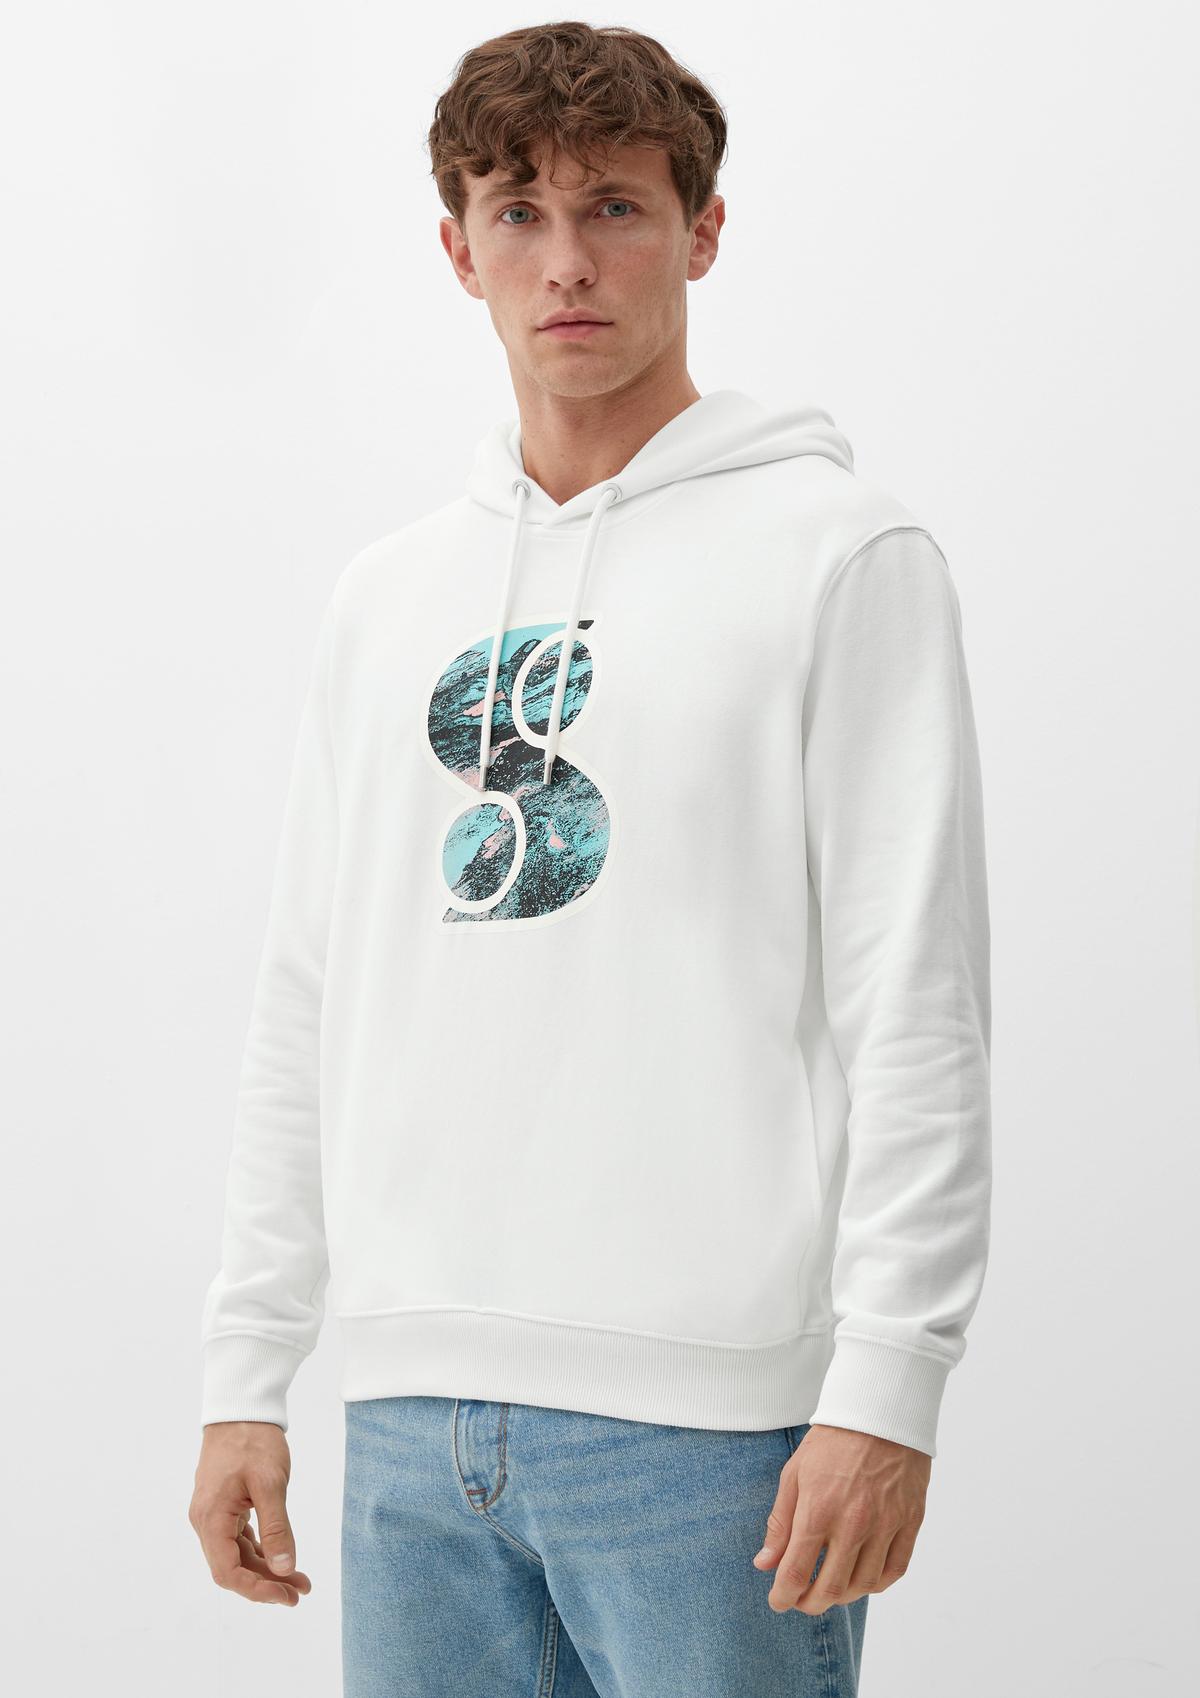 s.Oliver Sweatshirt with a front print